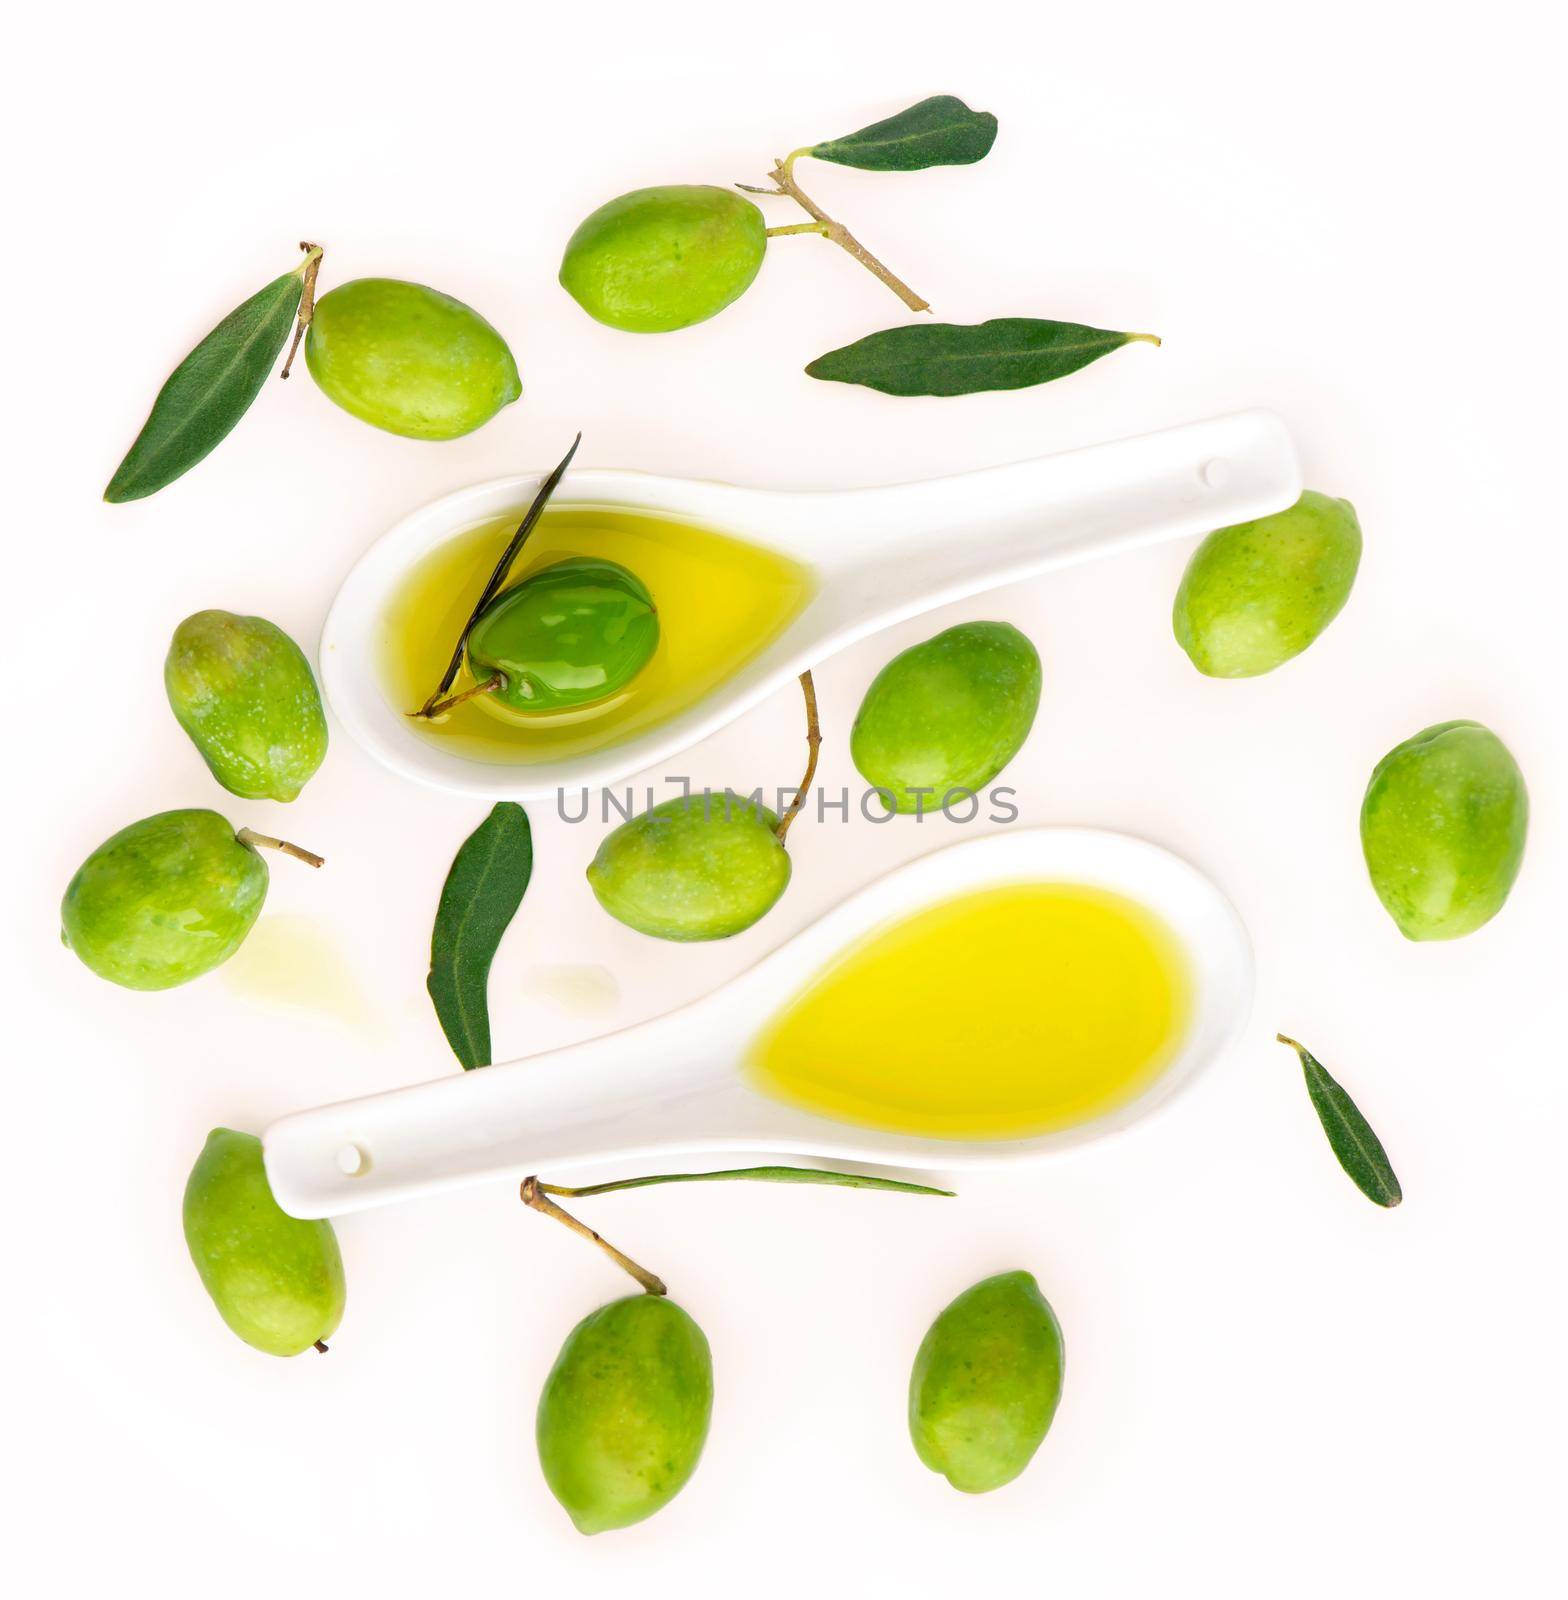 Olive fruit and olive leaves on a white background by aprilphoto